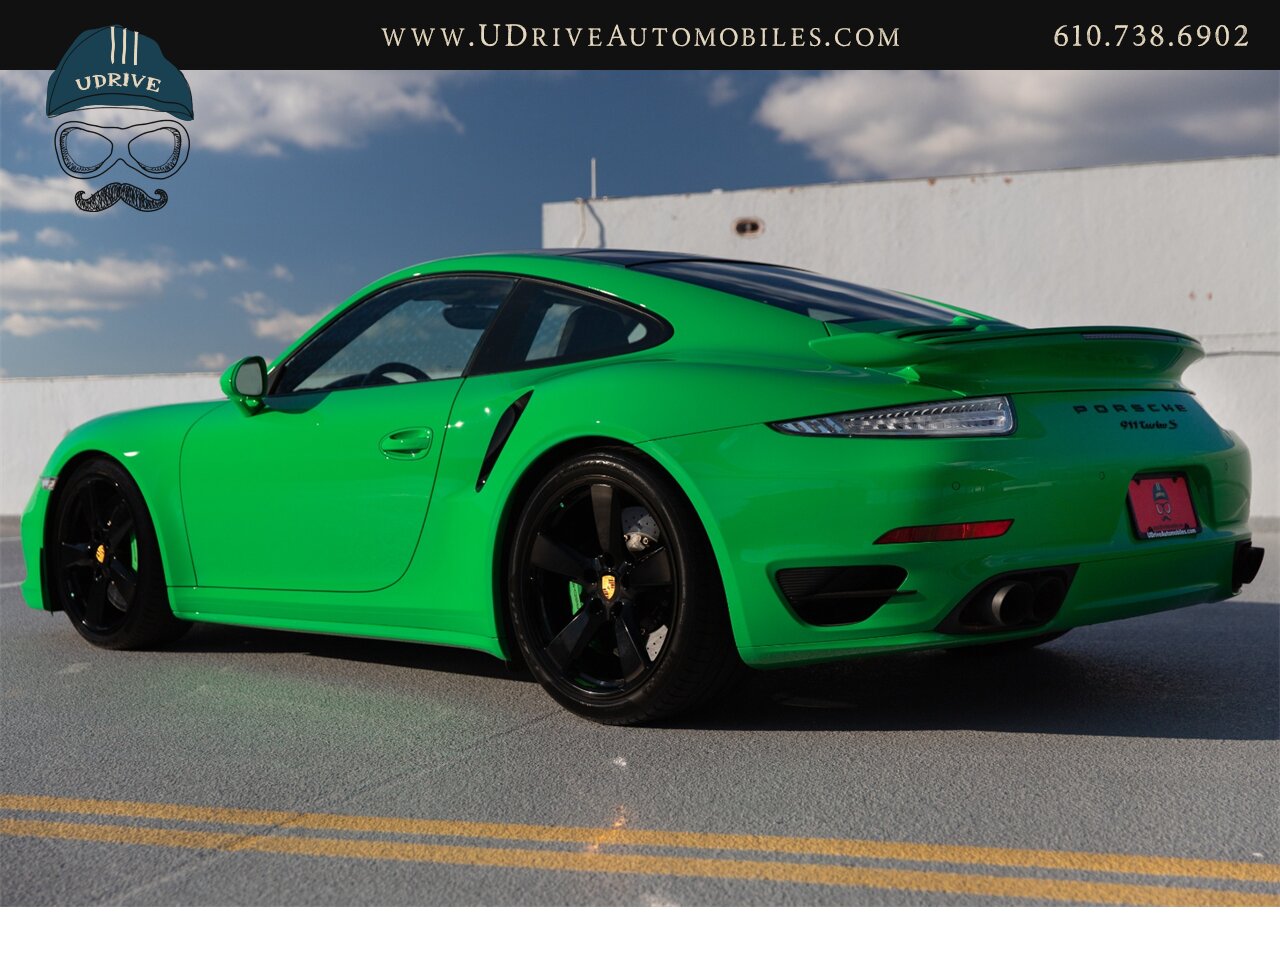 2016 Porsche 911 Turbo S PTS Viper Green Aerokit $203k MSRP  Painted Side Skirts Painted Grilles Wheels in Black - Photo 24 - West Chester, PA 19382